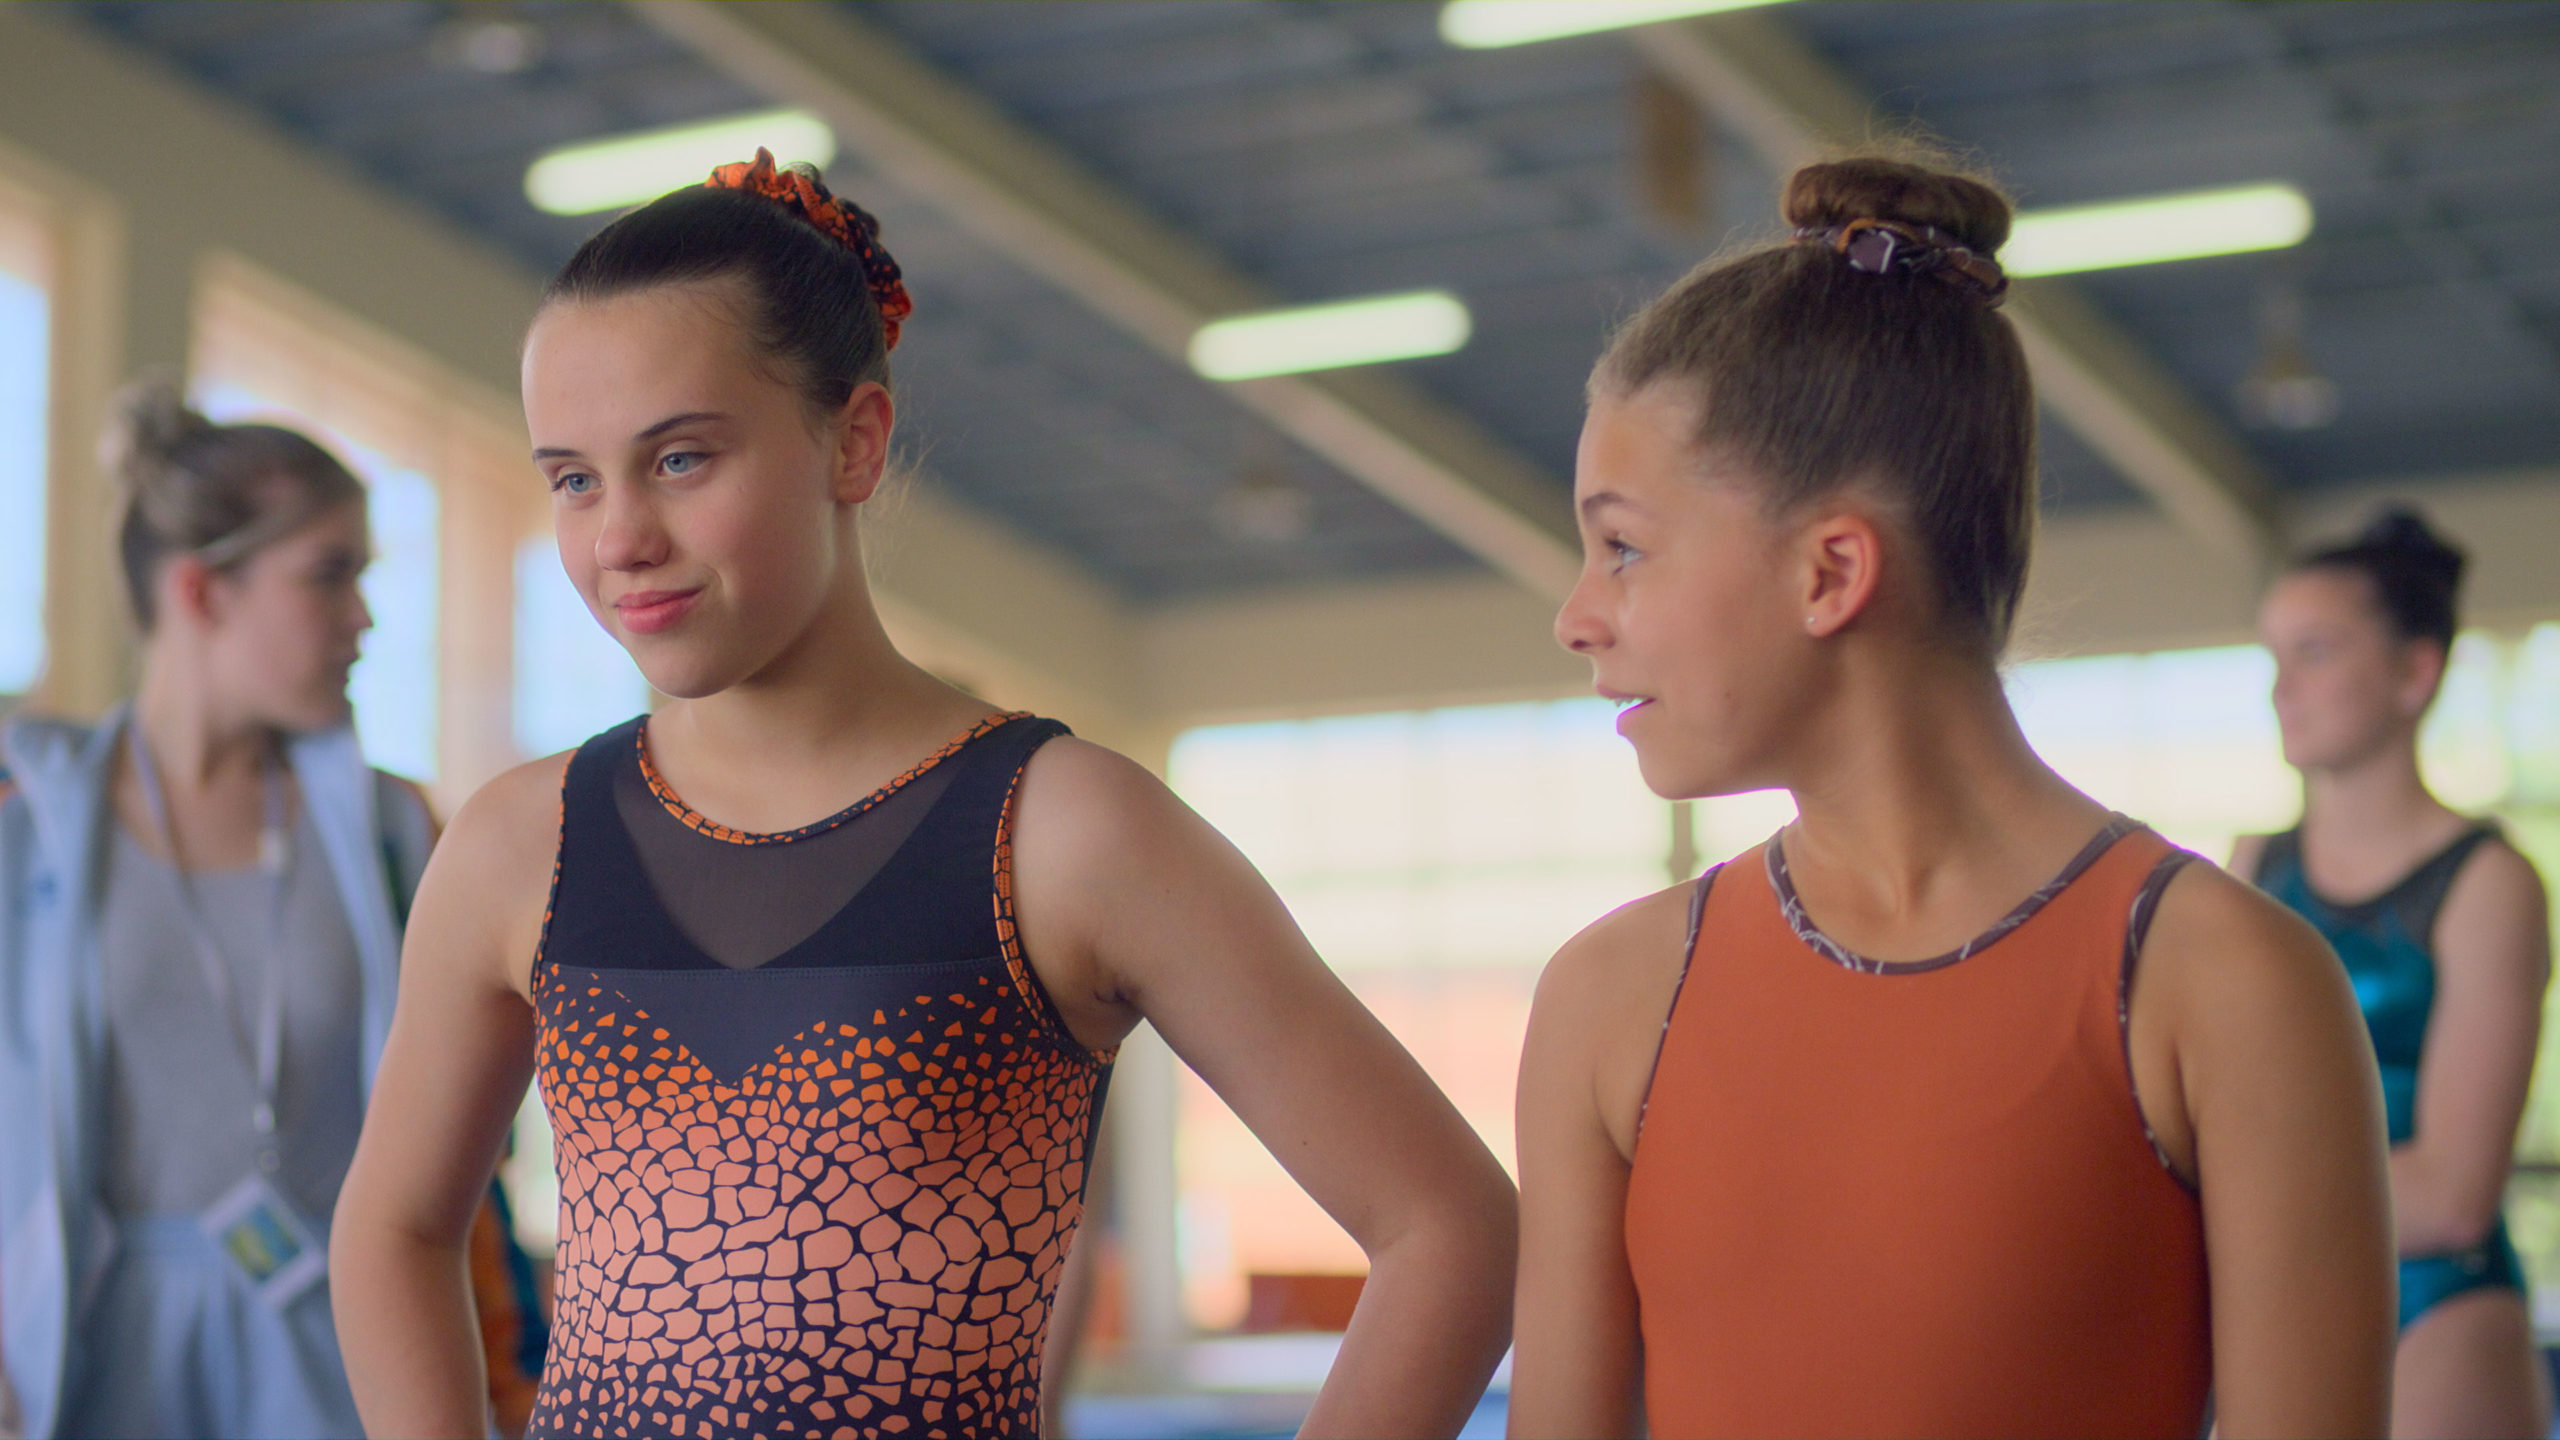 GYMNASTICS ACADEMY: A SECOND CHANCE! – Nicely Entertainment